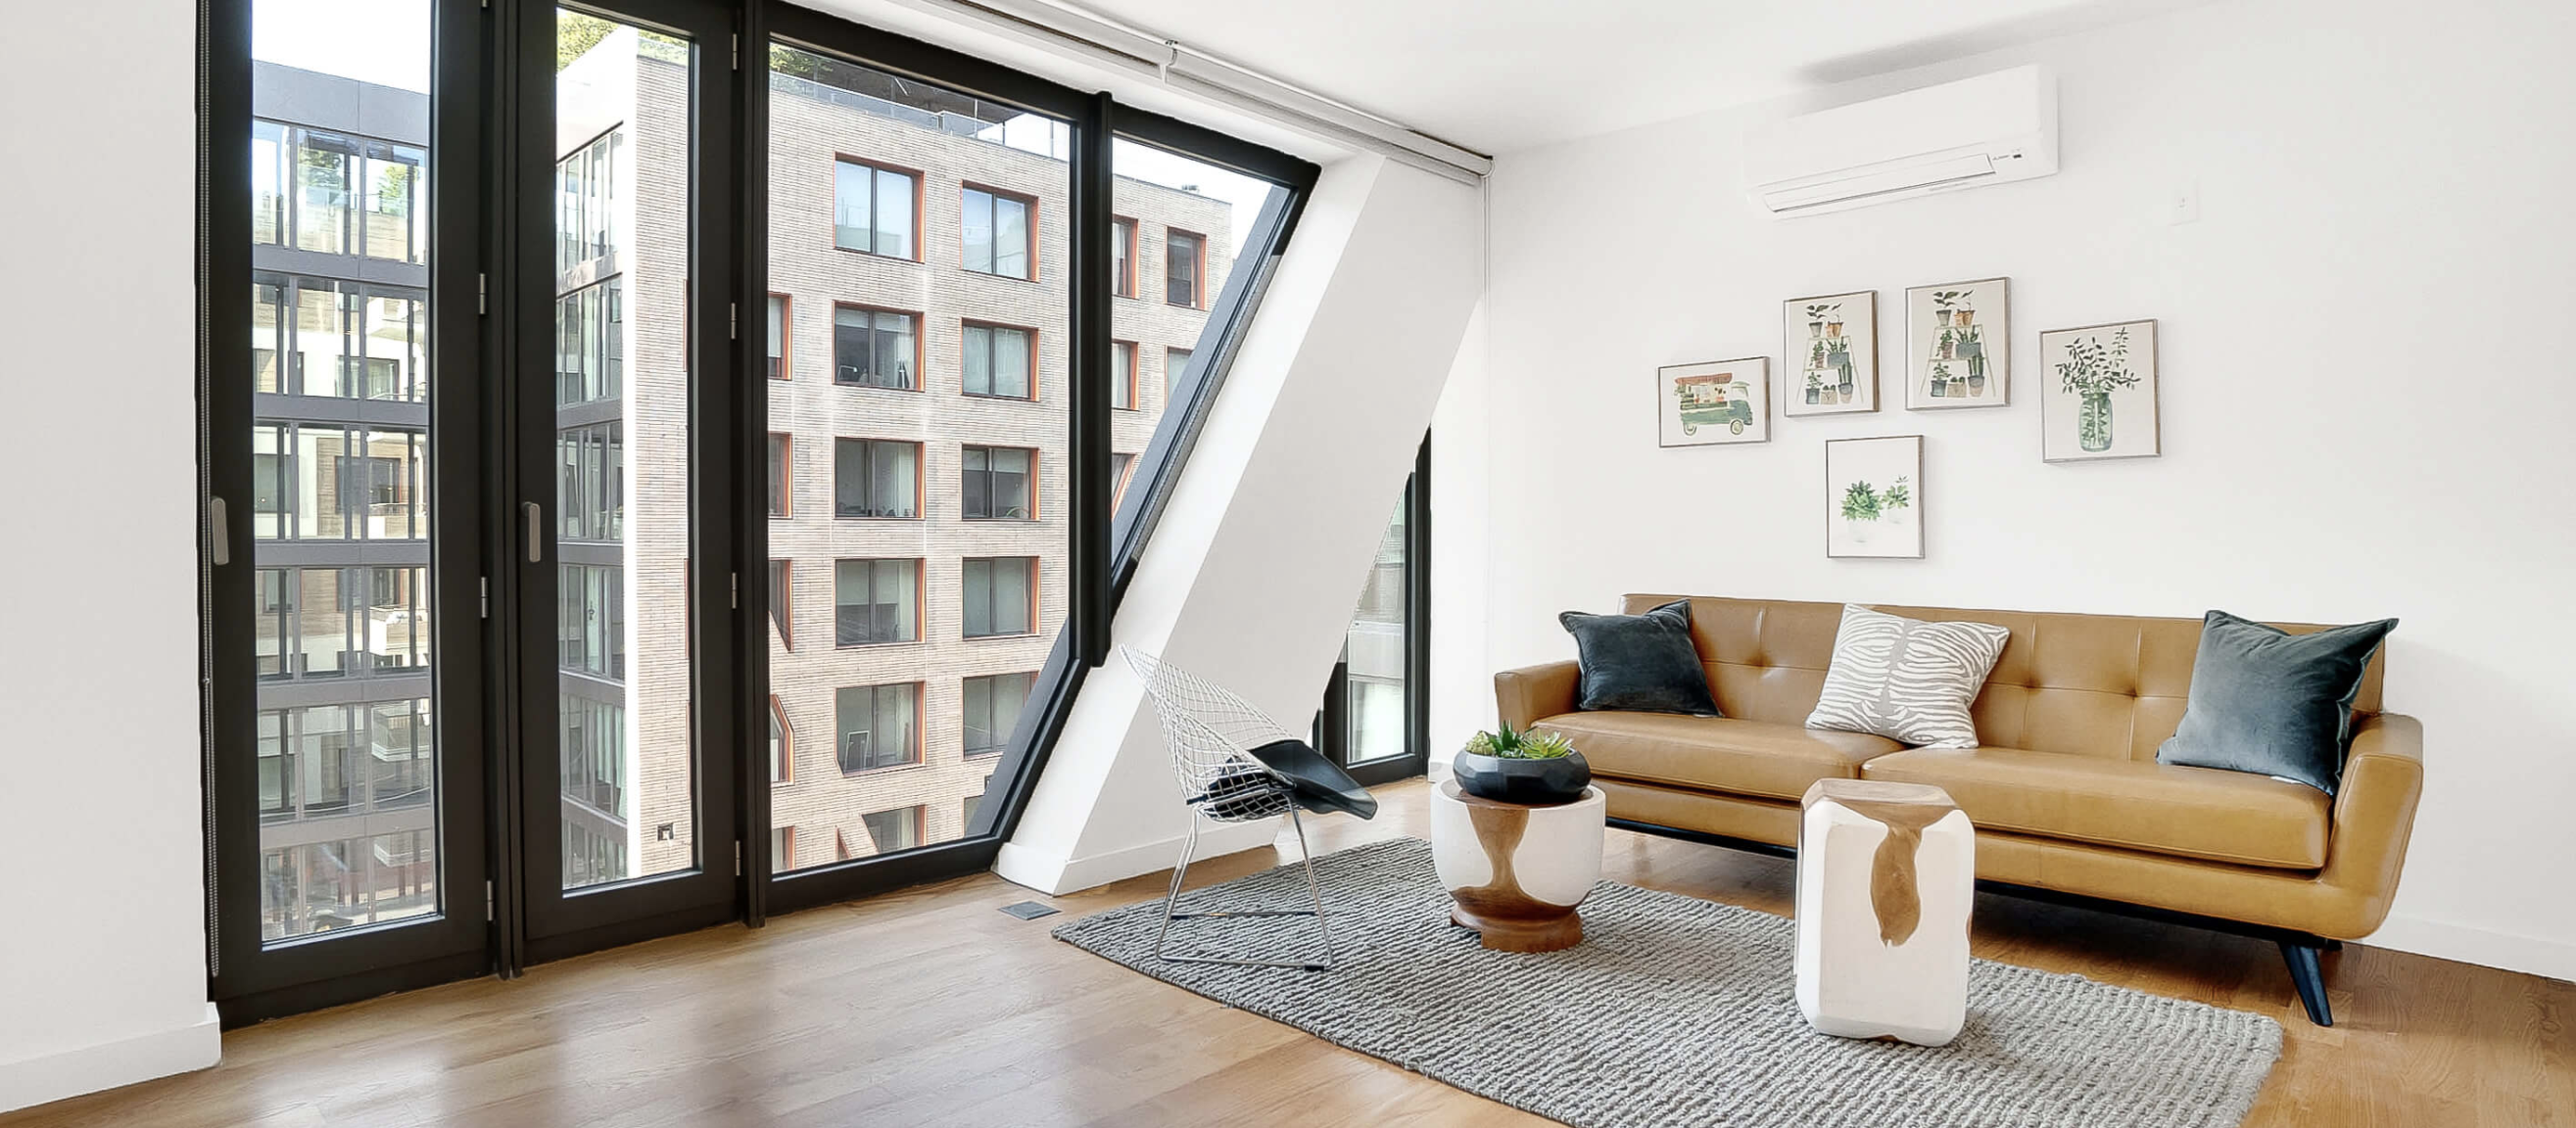 A photo of a living room of an apartment at the Denizen. It is clean, modern and with hardwood floors 